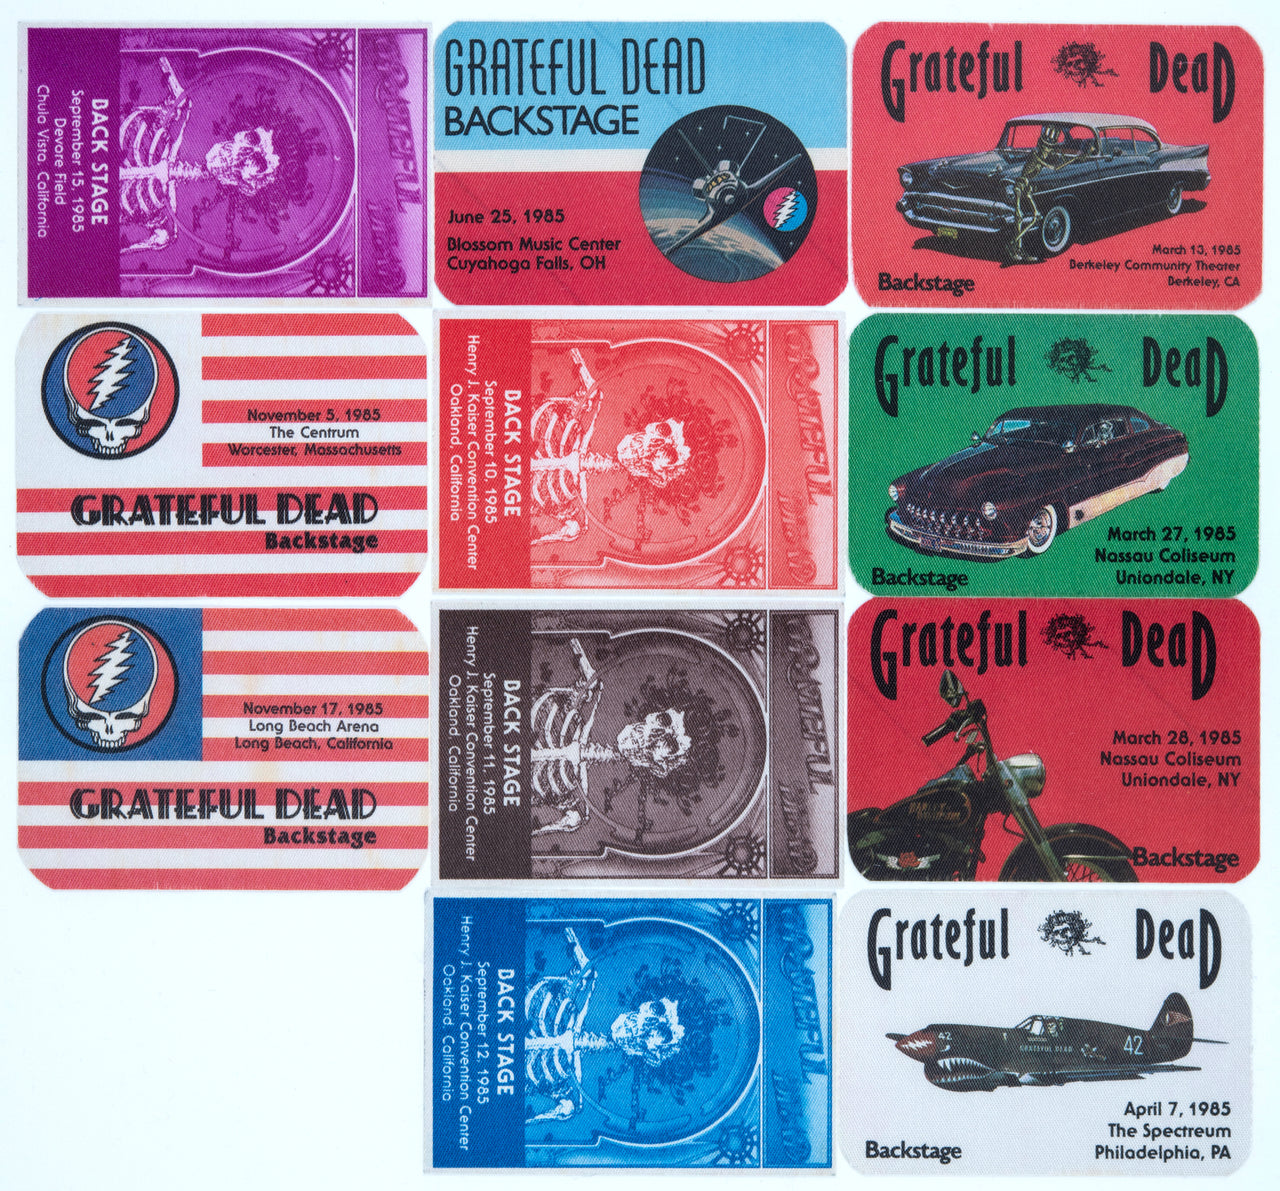 Grateful Dead Backstage Passes (3/13/1985 - 11/17/1985) from Dan Healy